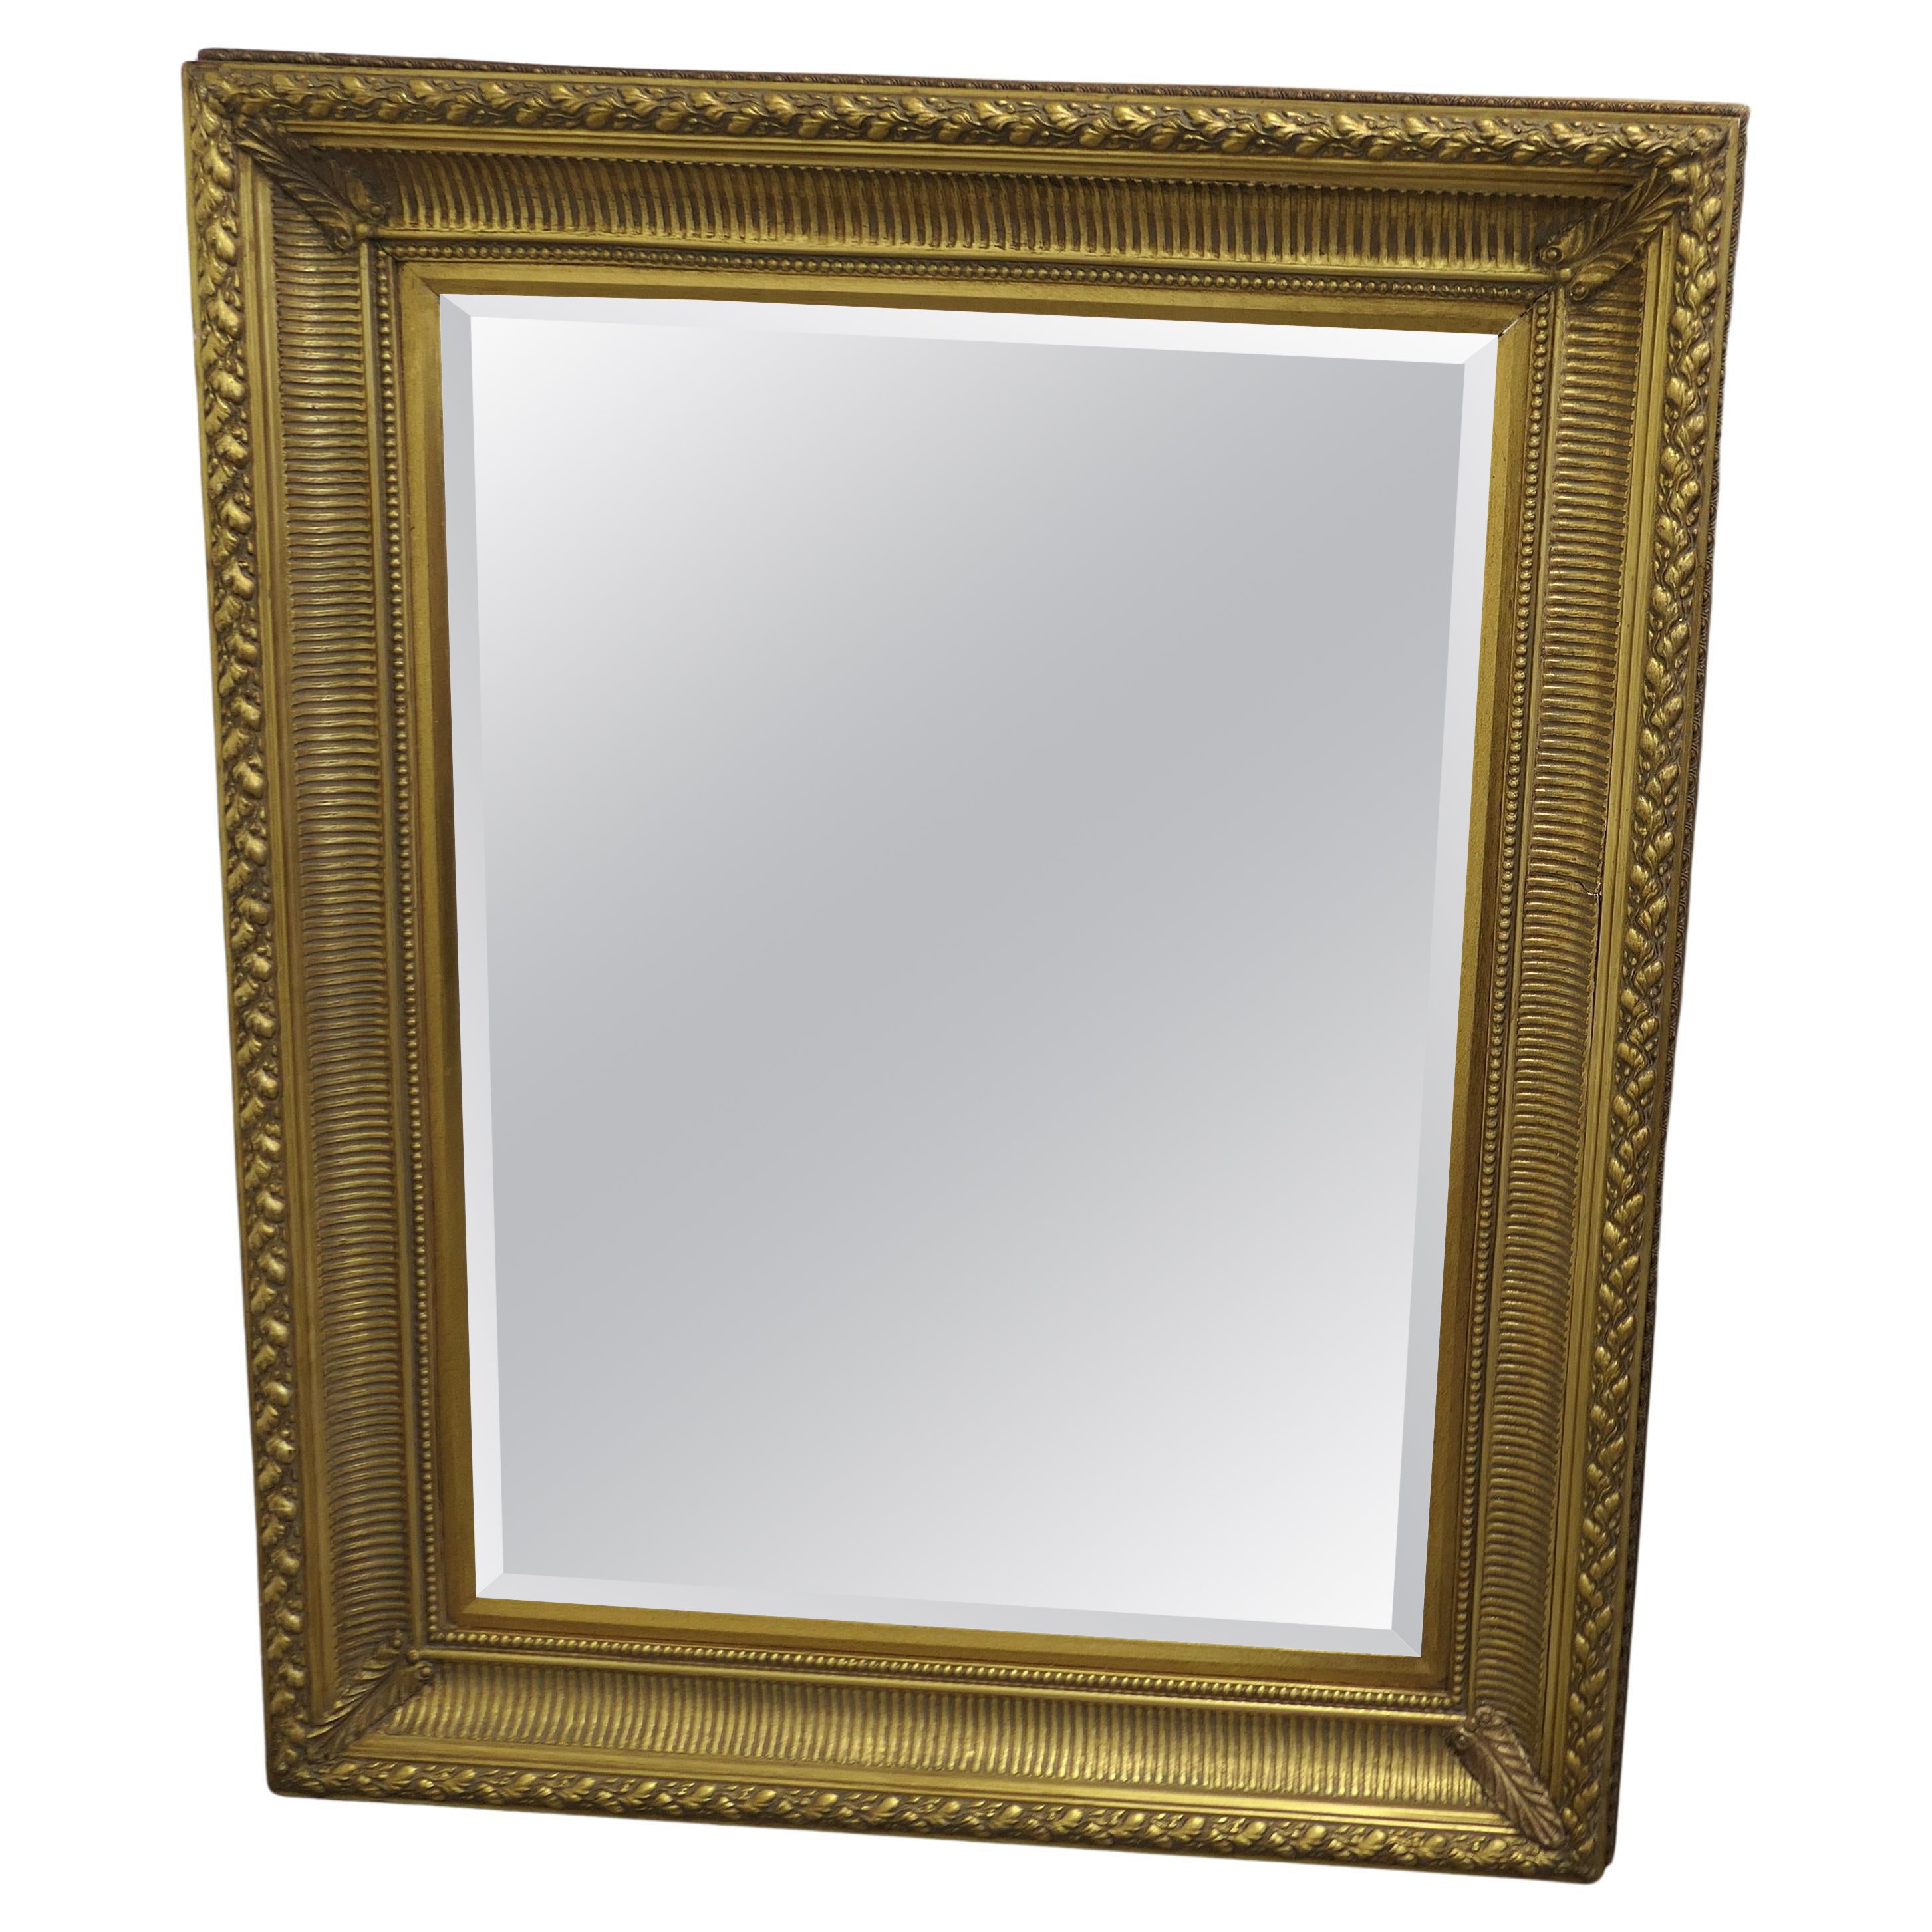 Large Decorative Gilt Wall Mirror This Is a Lovely Old Mirror For Sale